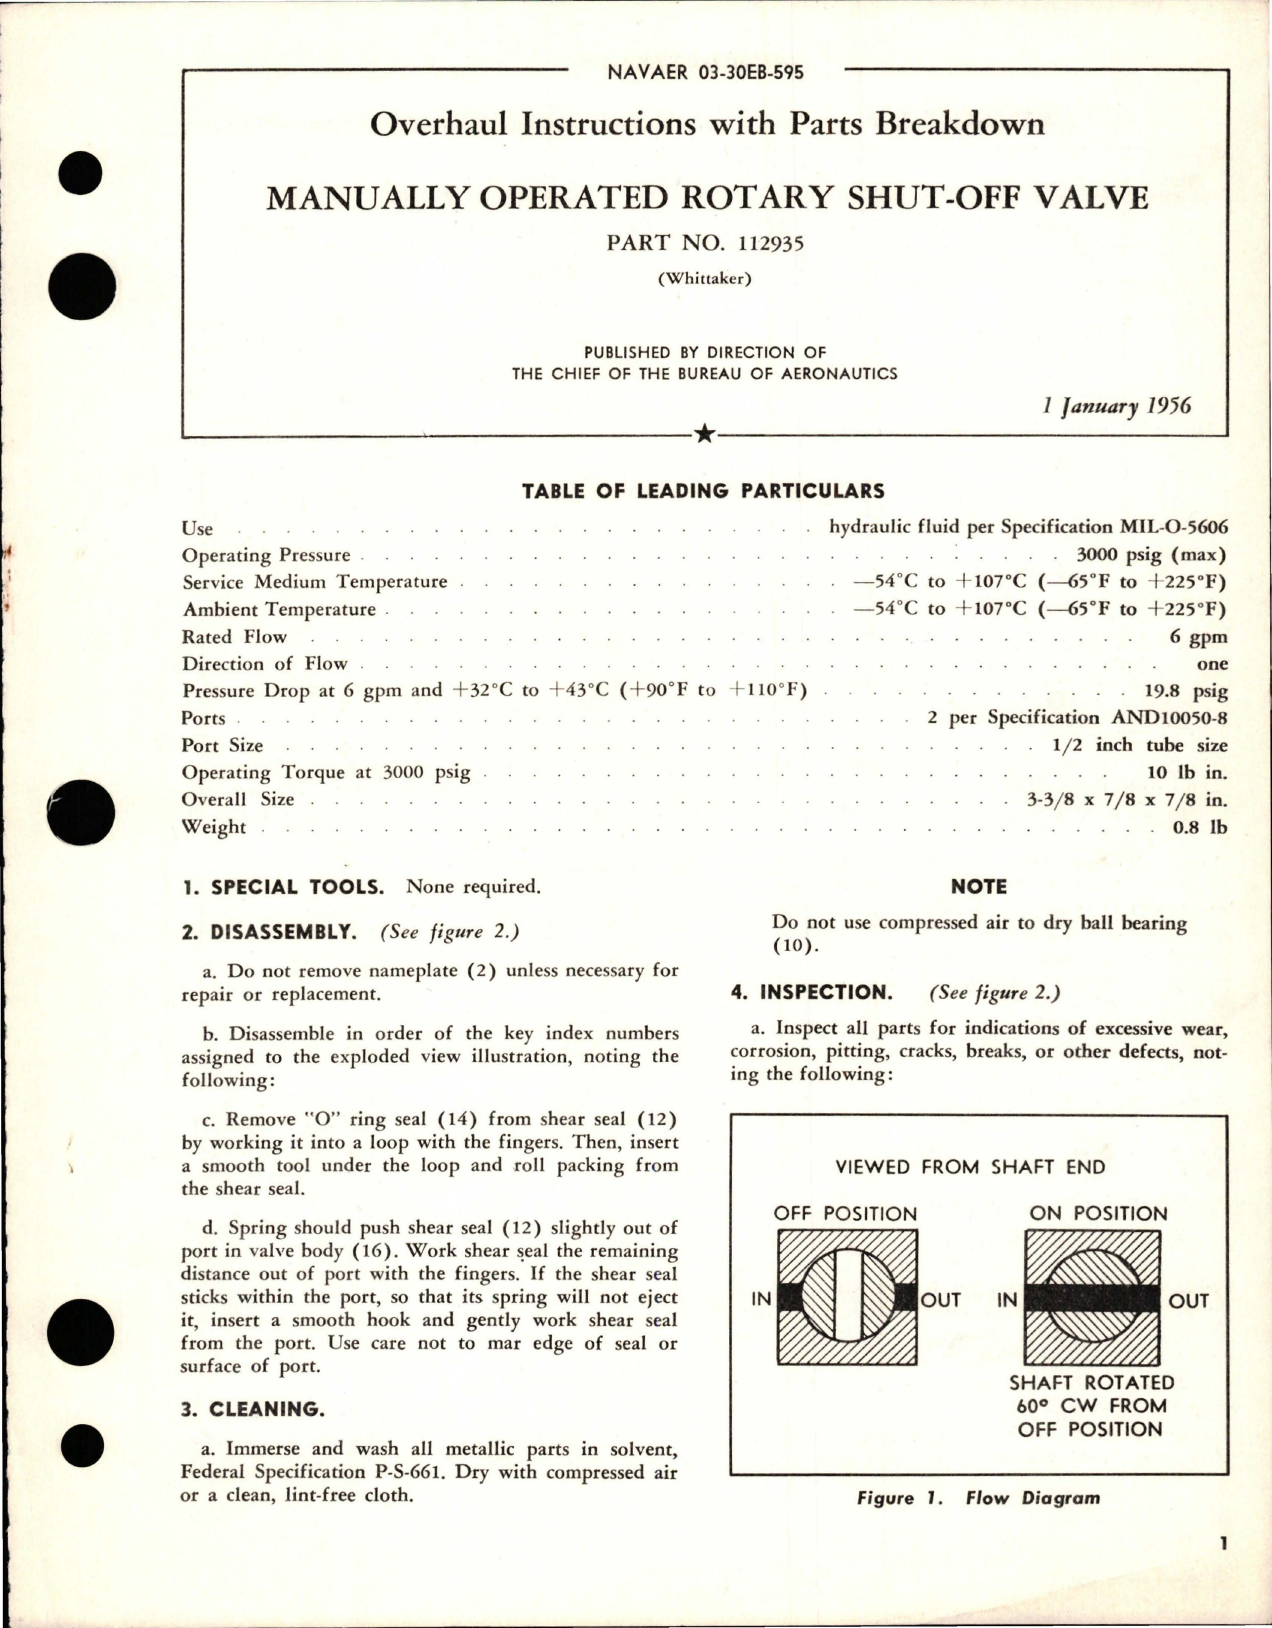 Sample page 1 from AirCorps Library document: Overhaul Instructions with Parts Breakdown for Manually Operated Rotary Shut-Off Valve - Part 112935